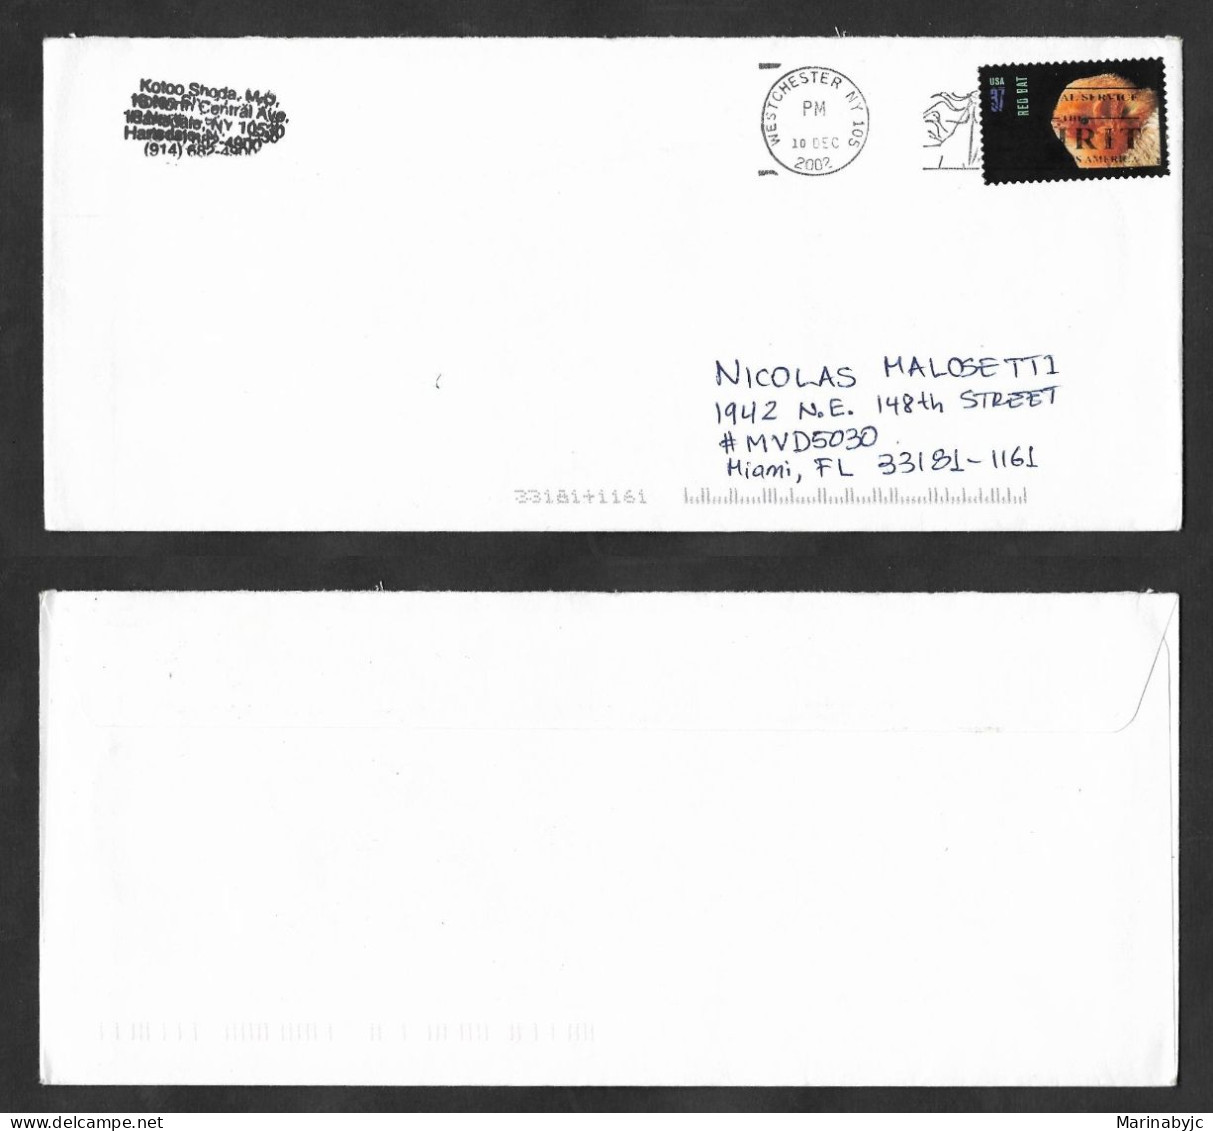 SE)2002 UNITED STATES, BATS OF AMERICA, RED BAT, CIRCULATED COVER FROM NEW YORK TO MIAMI USA, VF - Used Stamps